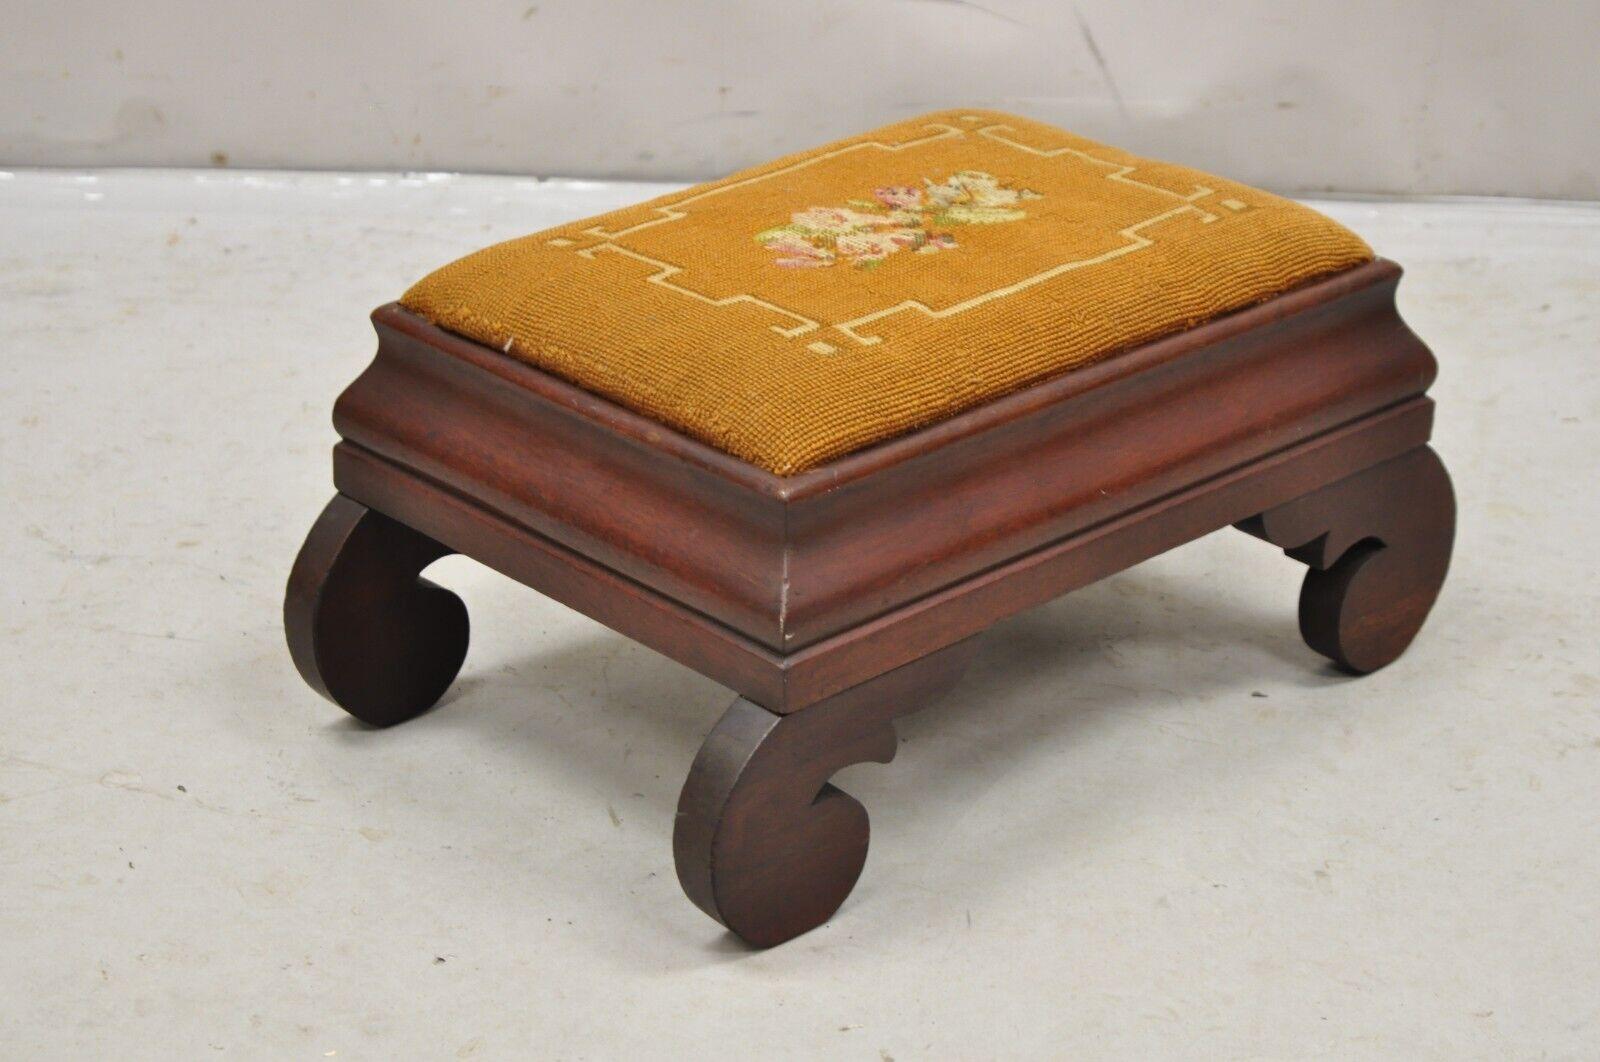 Antique American Empire Mahogany Brown Floral Needlepoint Footstool Ottoman. Circa Late 19th Century. Measurements: 9.5